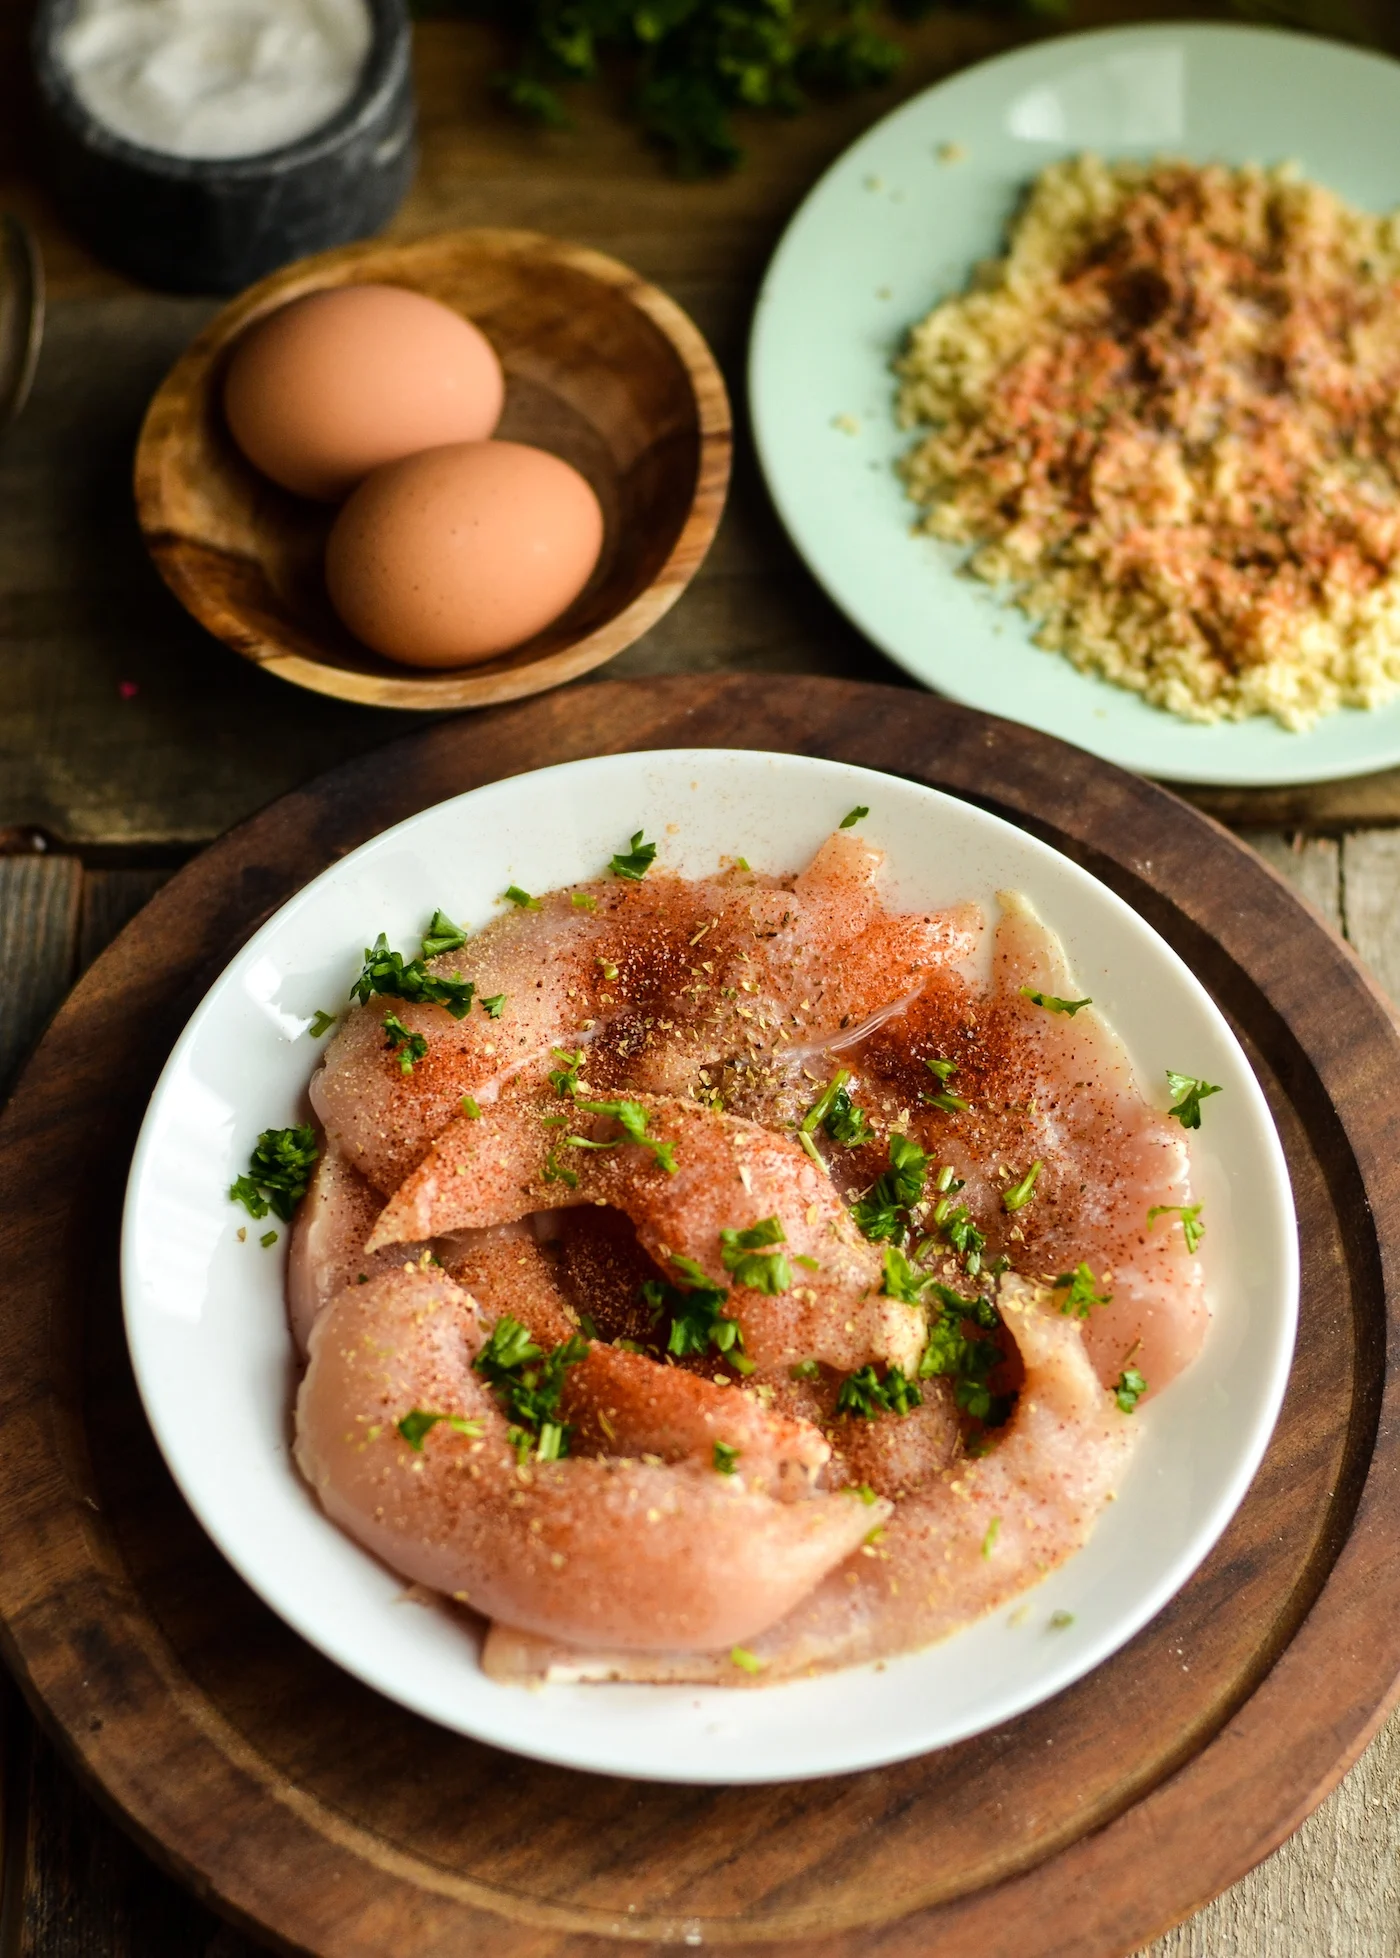 Raw chicken pieces in a bowl with lemon juice and seasoning